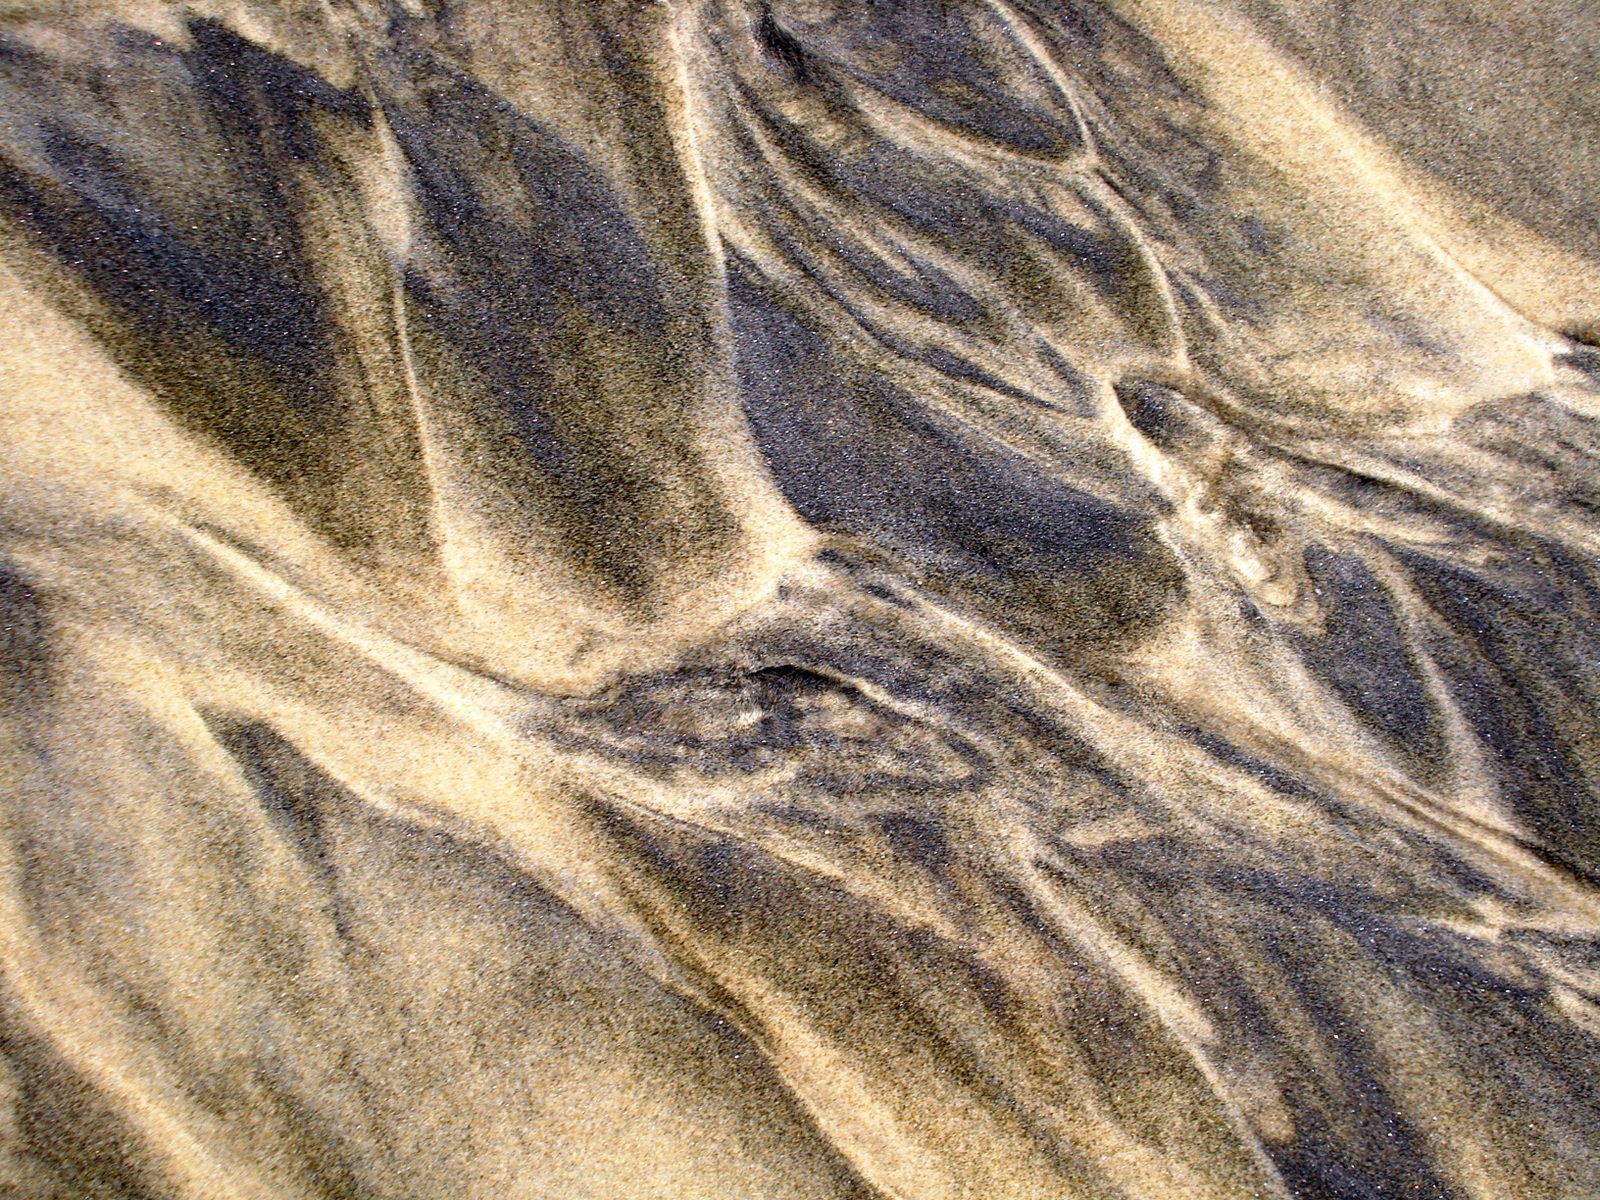 several layers of sand at a beach that appears to be very low